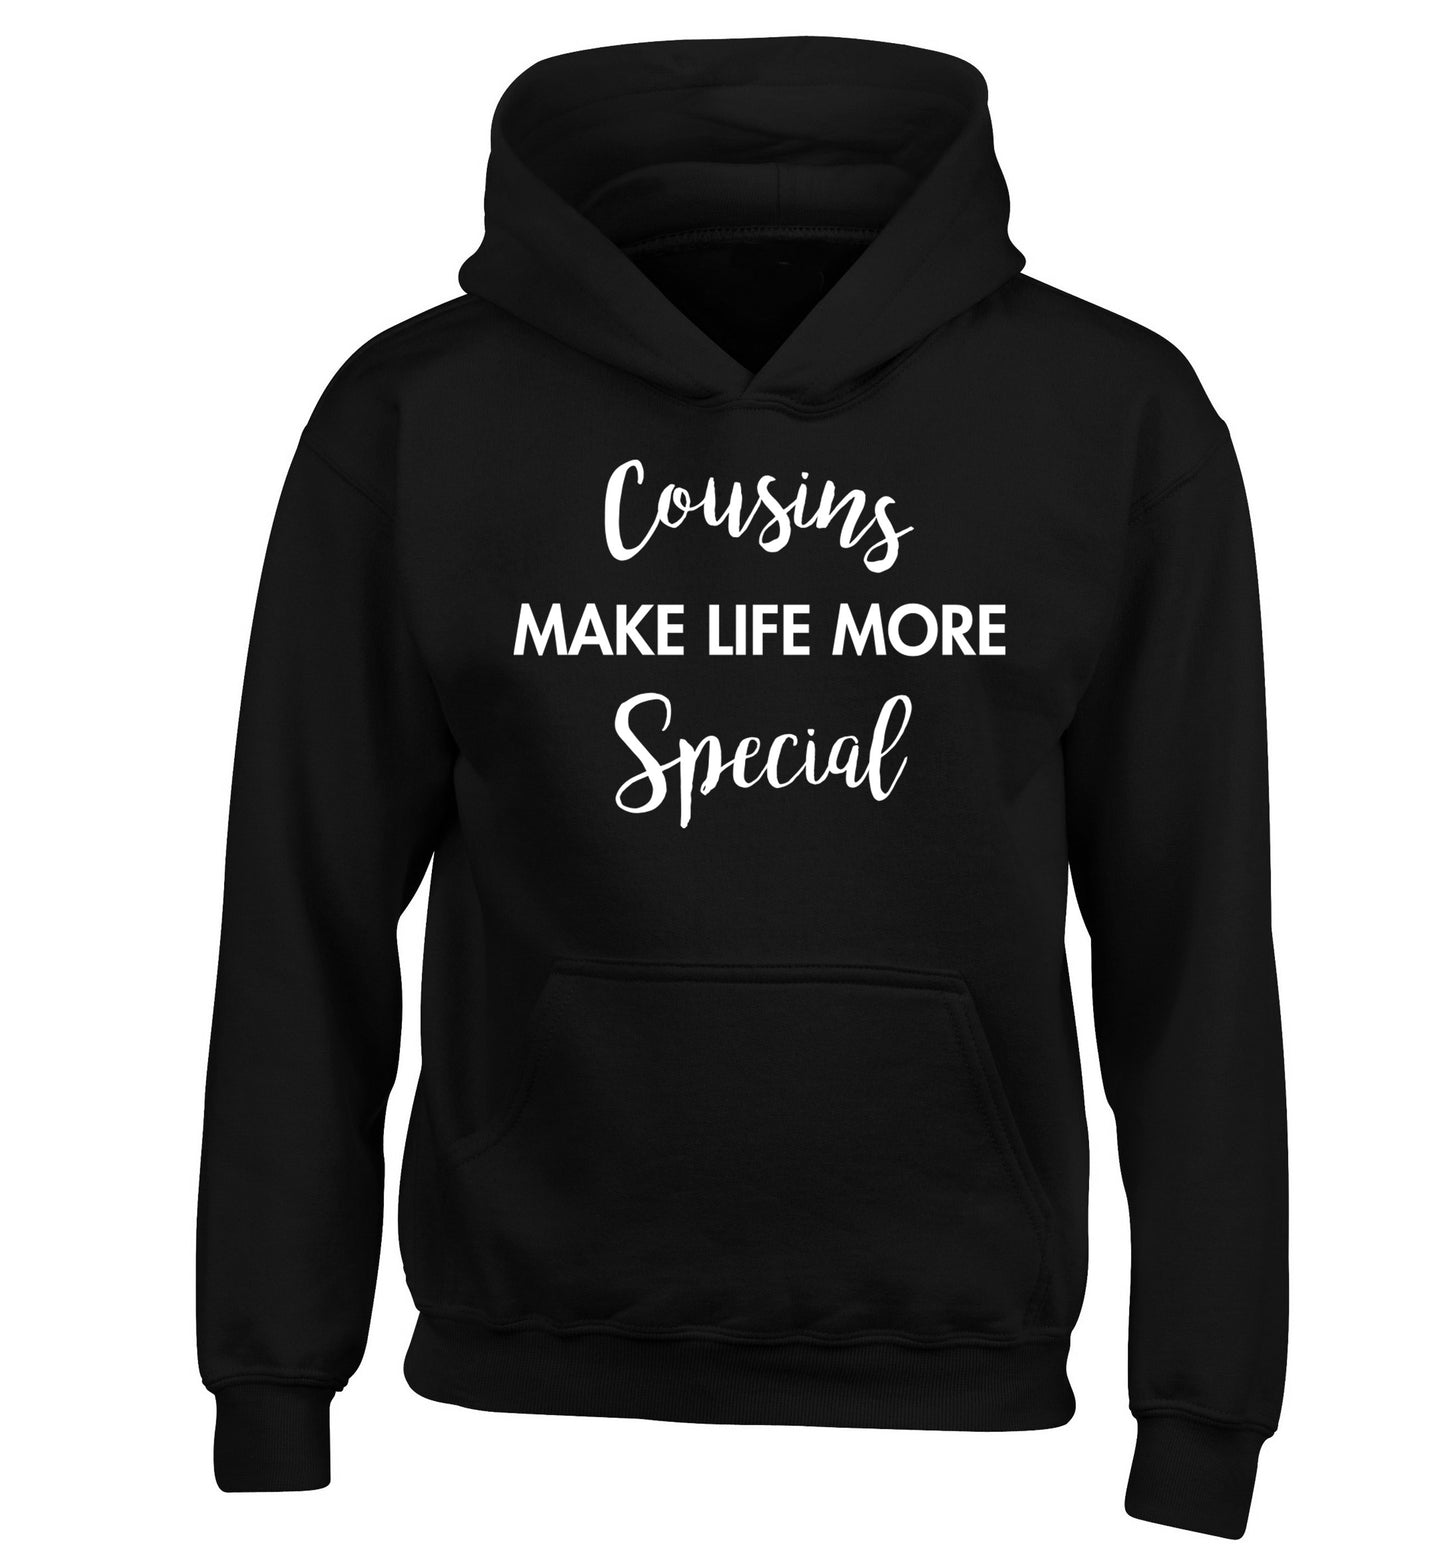 Cousins make life more special children's black hoodie 12-14 Years